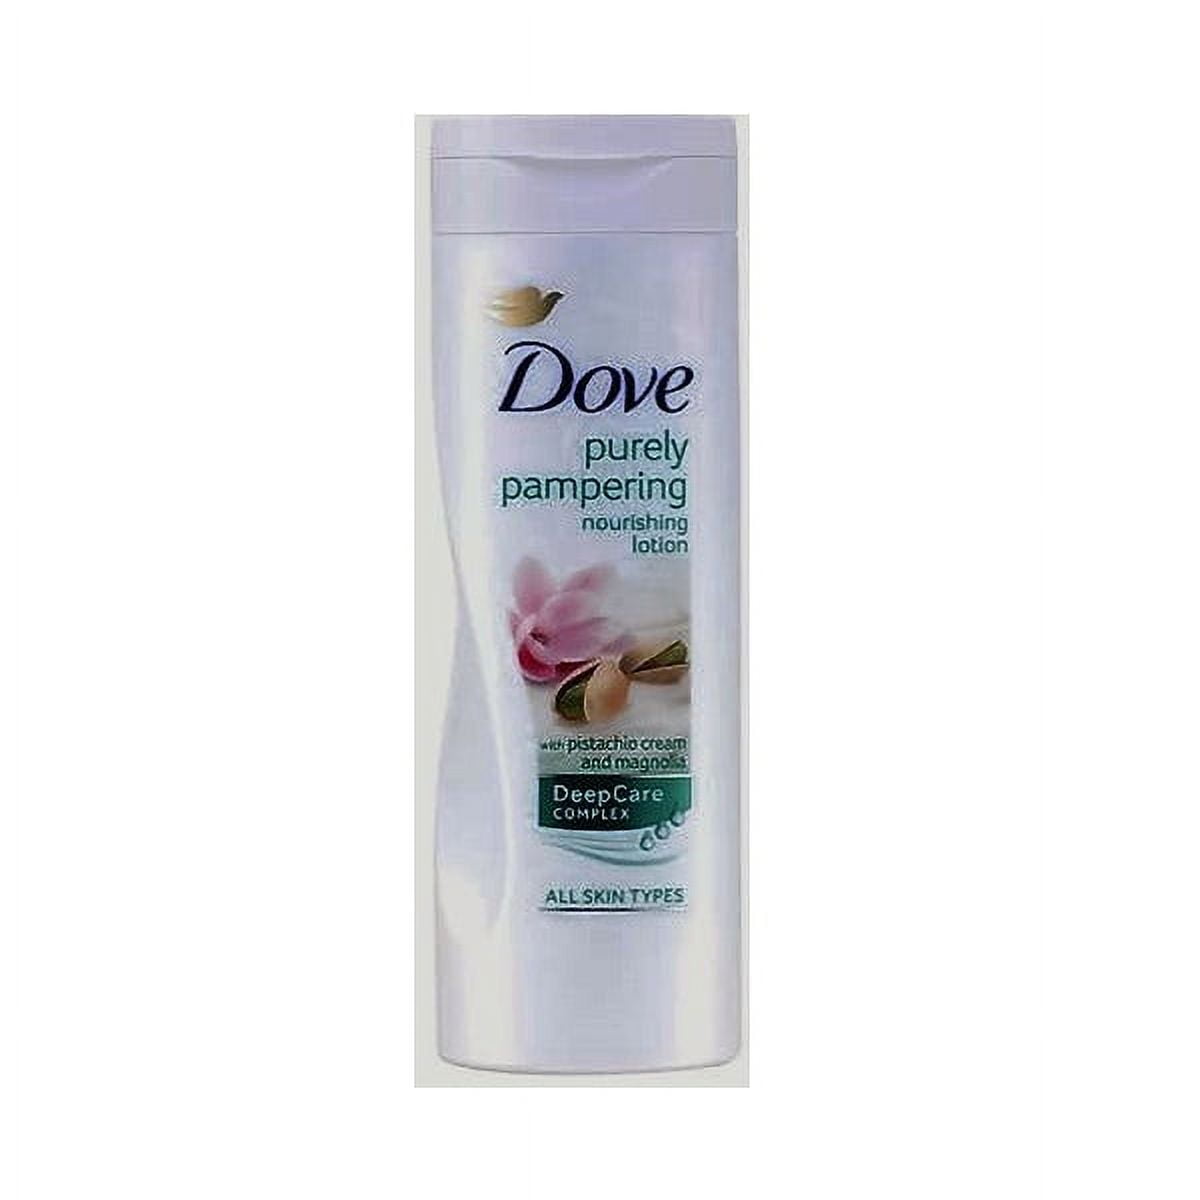 dove purley pampering pistachio